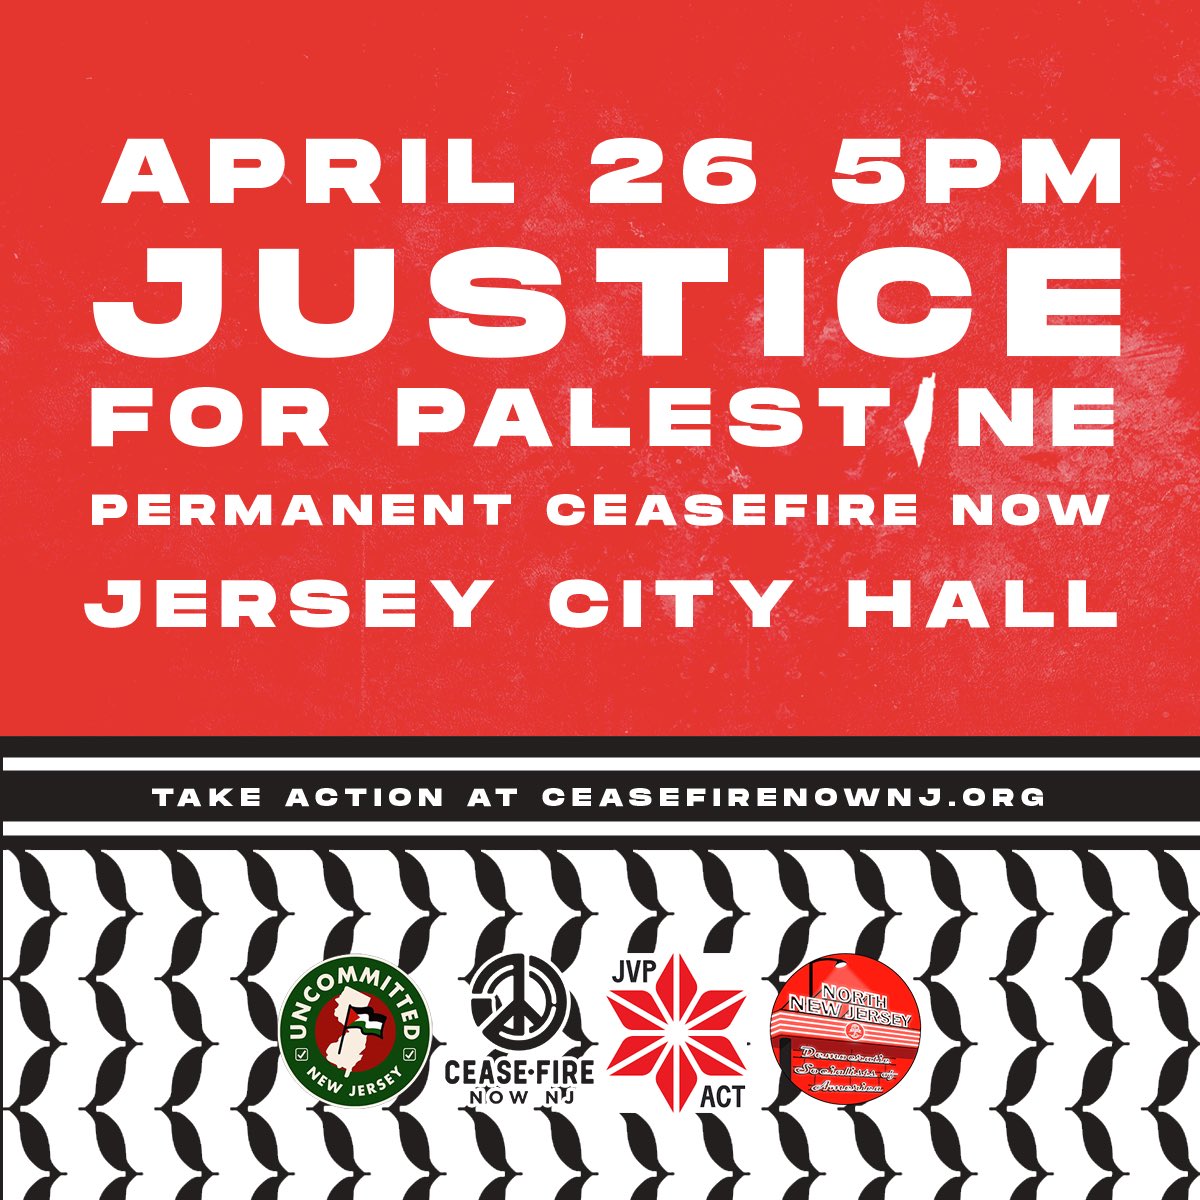 🇵🇸 EMERGENCY ACTION 🗣️ ⏰ friday april 26 5pm 📍 280 Grove St. JC with @NorthNJDSA @JvpAction and Ceasefire Now NJ